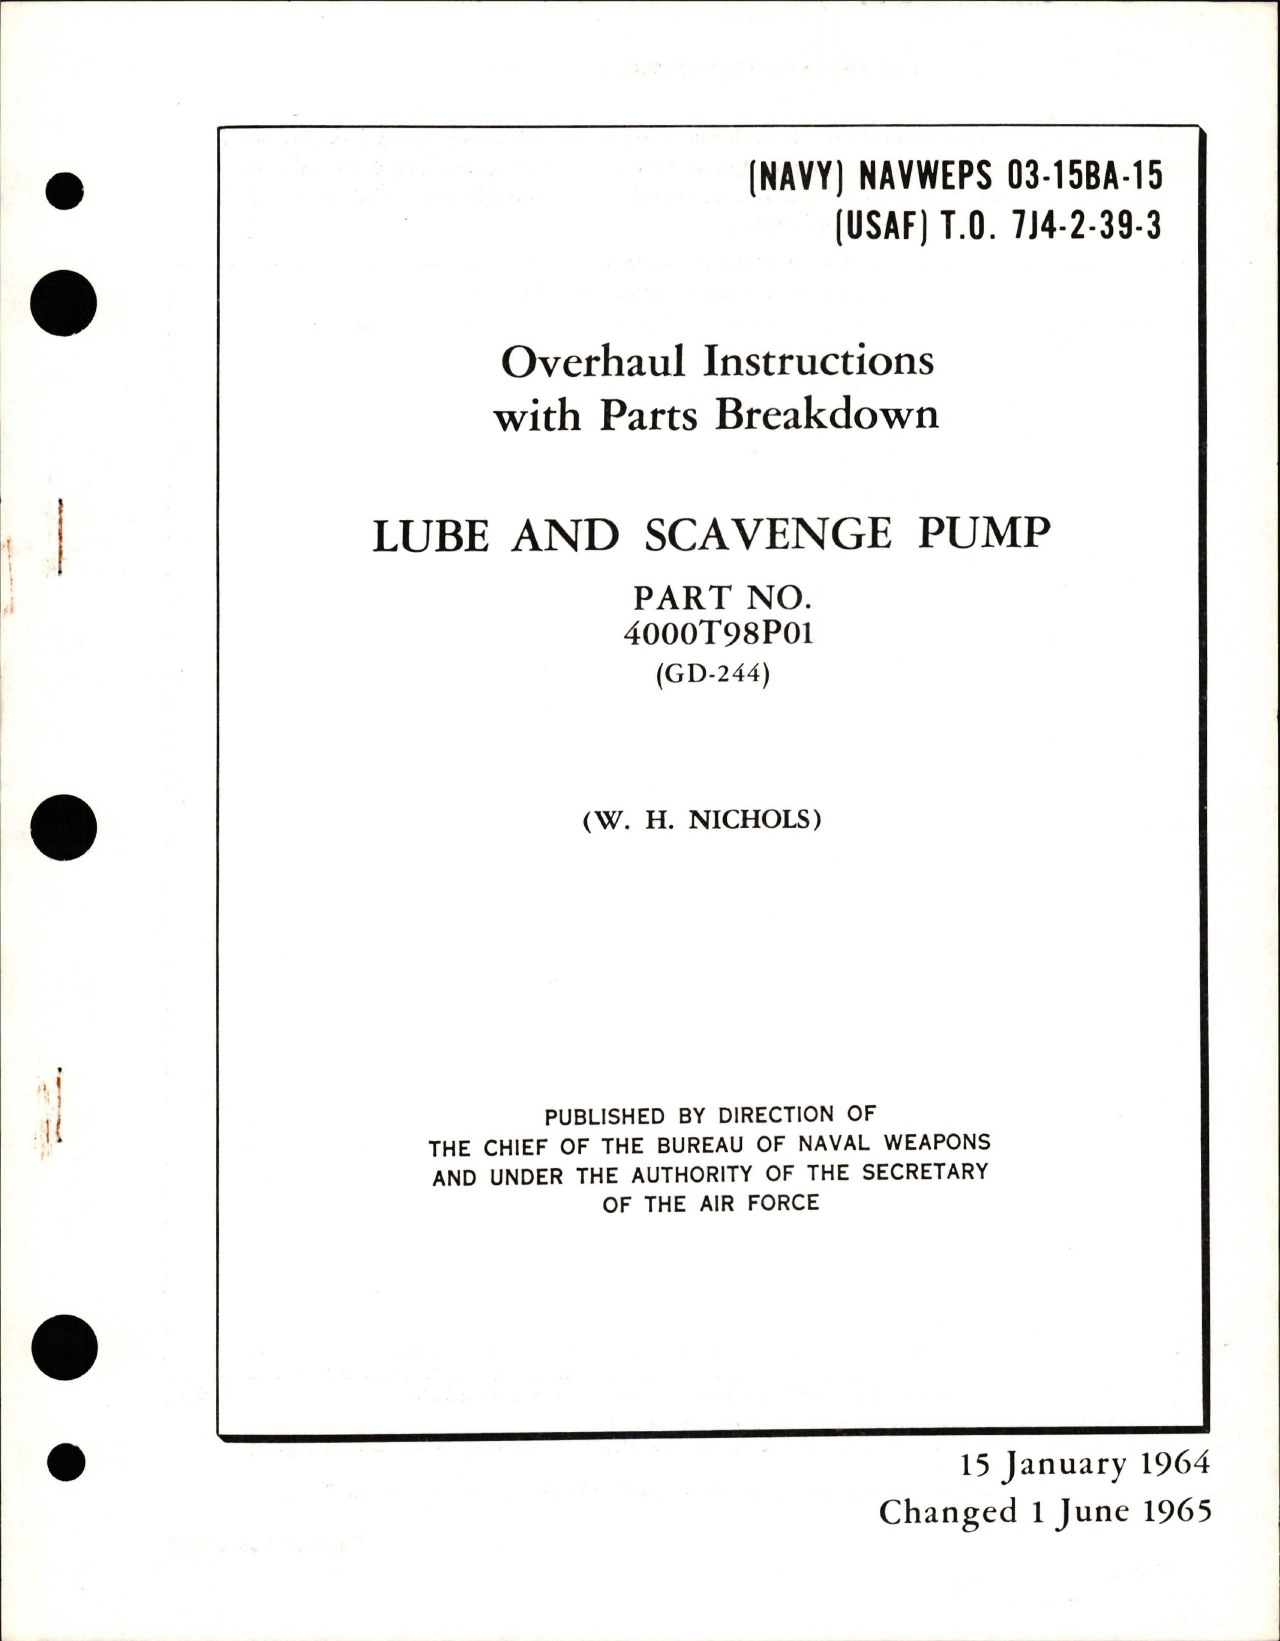 Sample page 1 from AirCorps Library document: Overhaul Instructions with Parts for Lube and Scavenge Pump - Part 4000T98P01 - GD-244